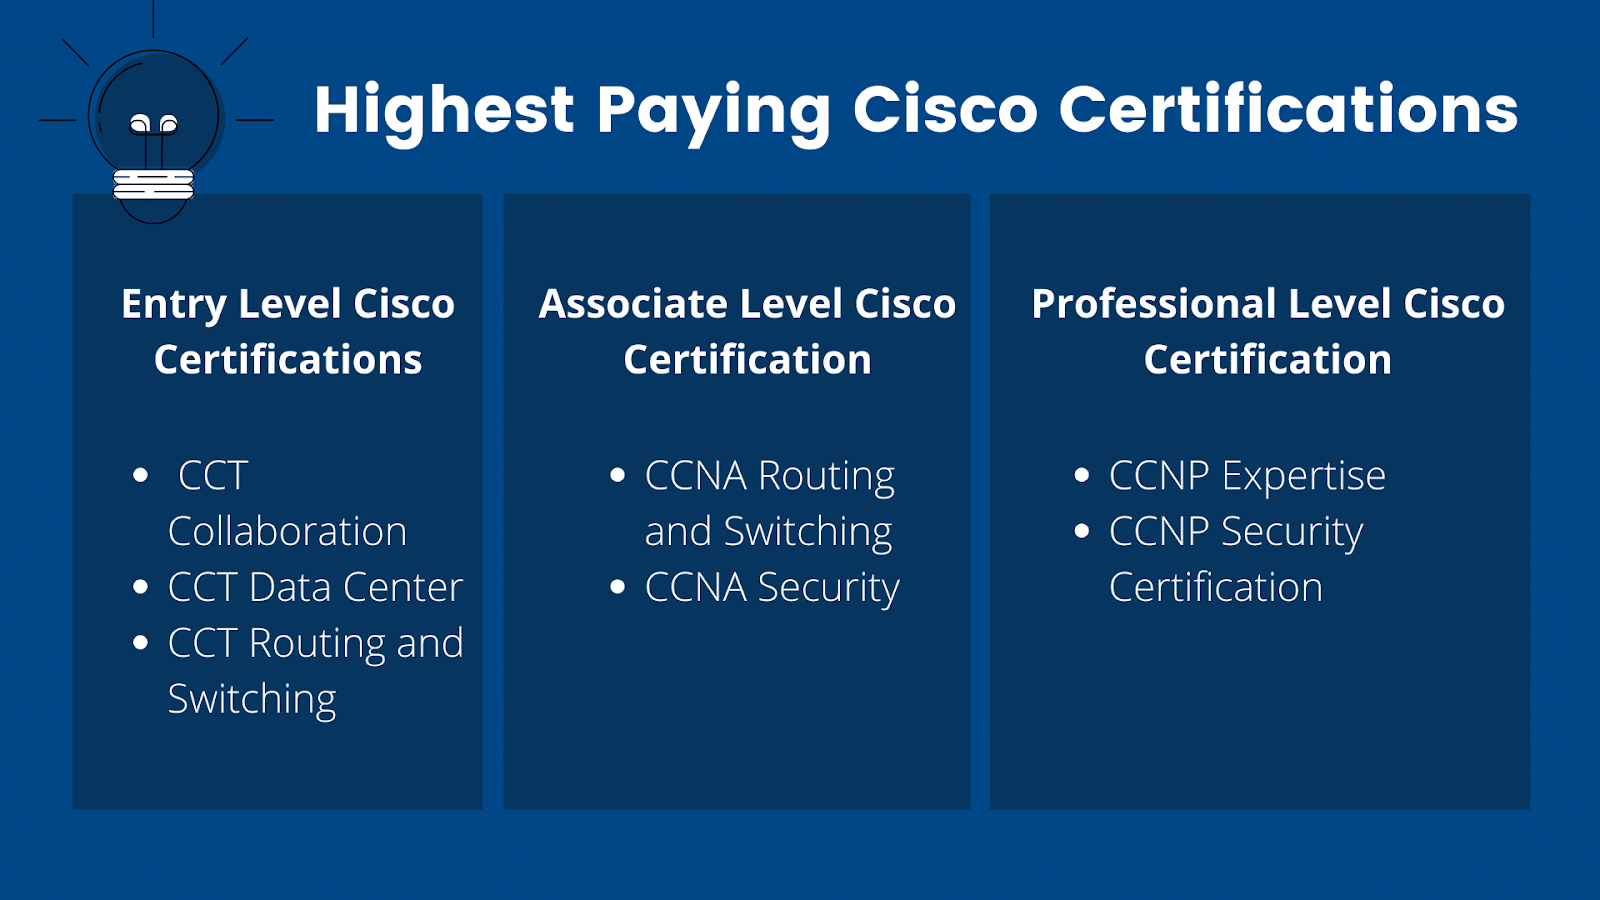 Highest Paying Cisco Certifications